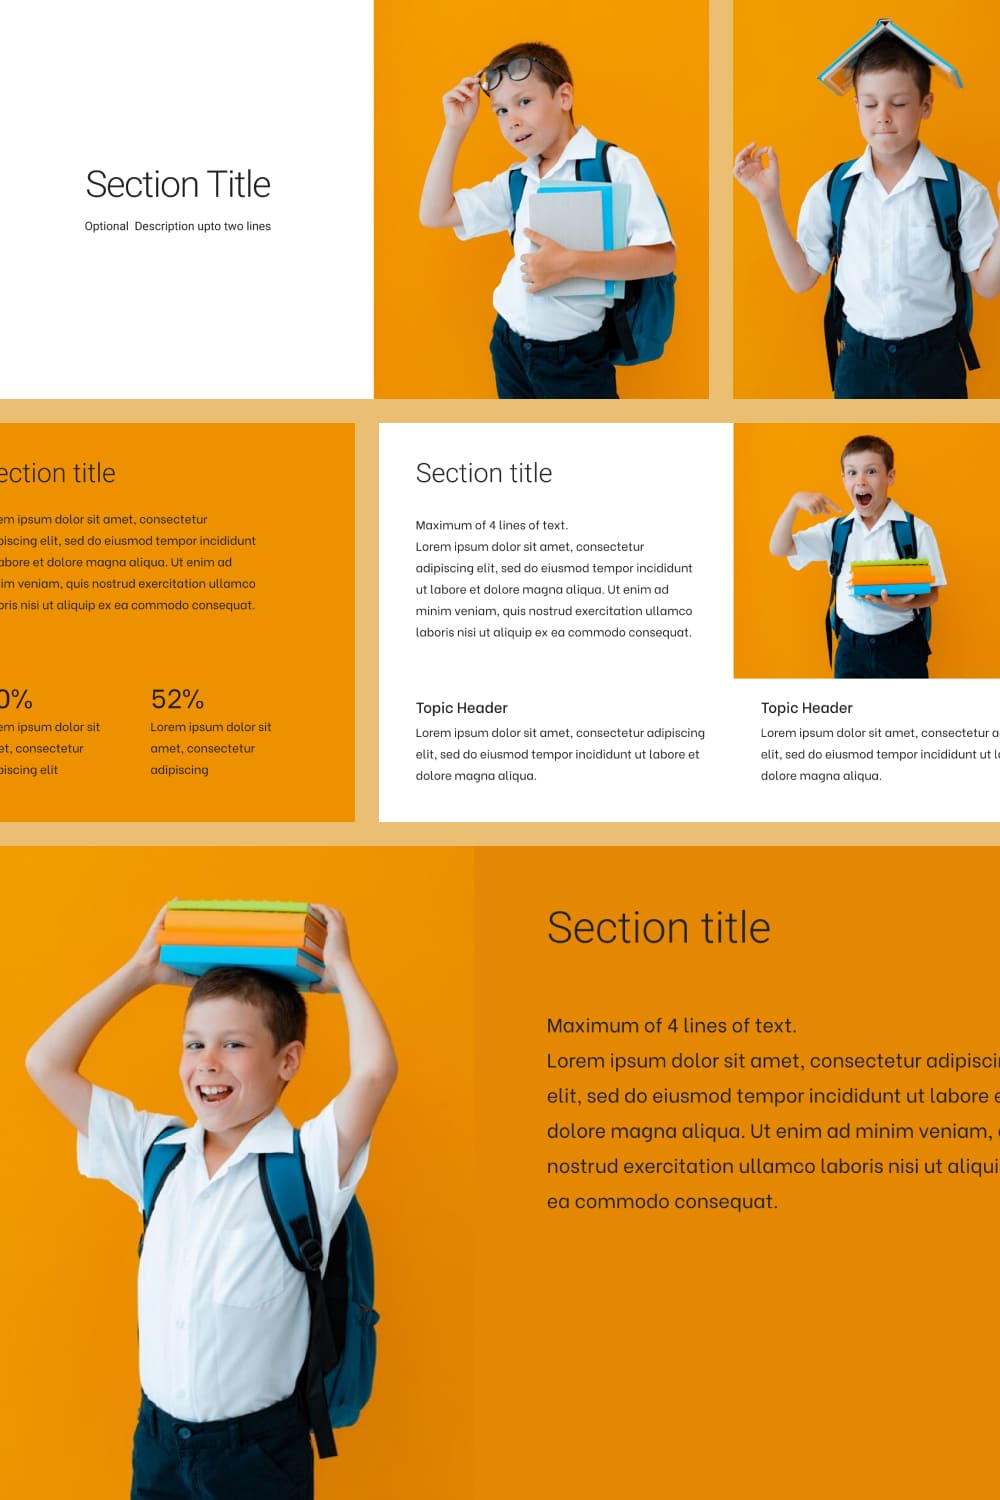 Pinterest Free Back To School Powerpoint Template.